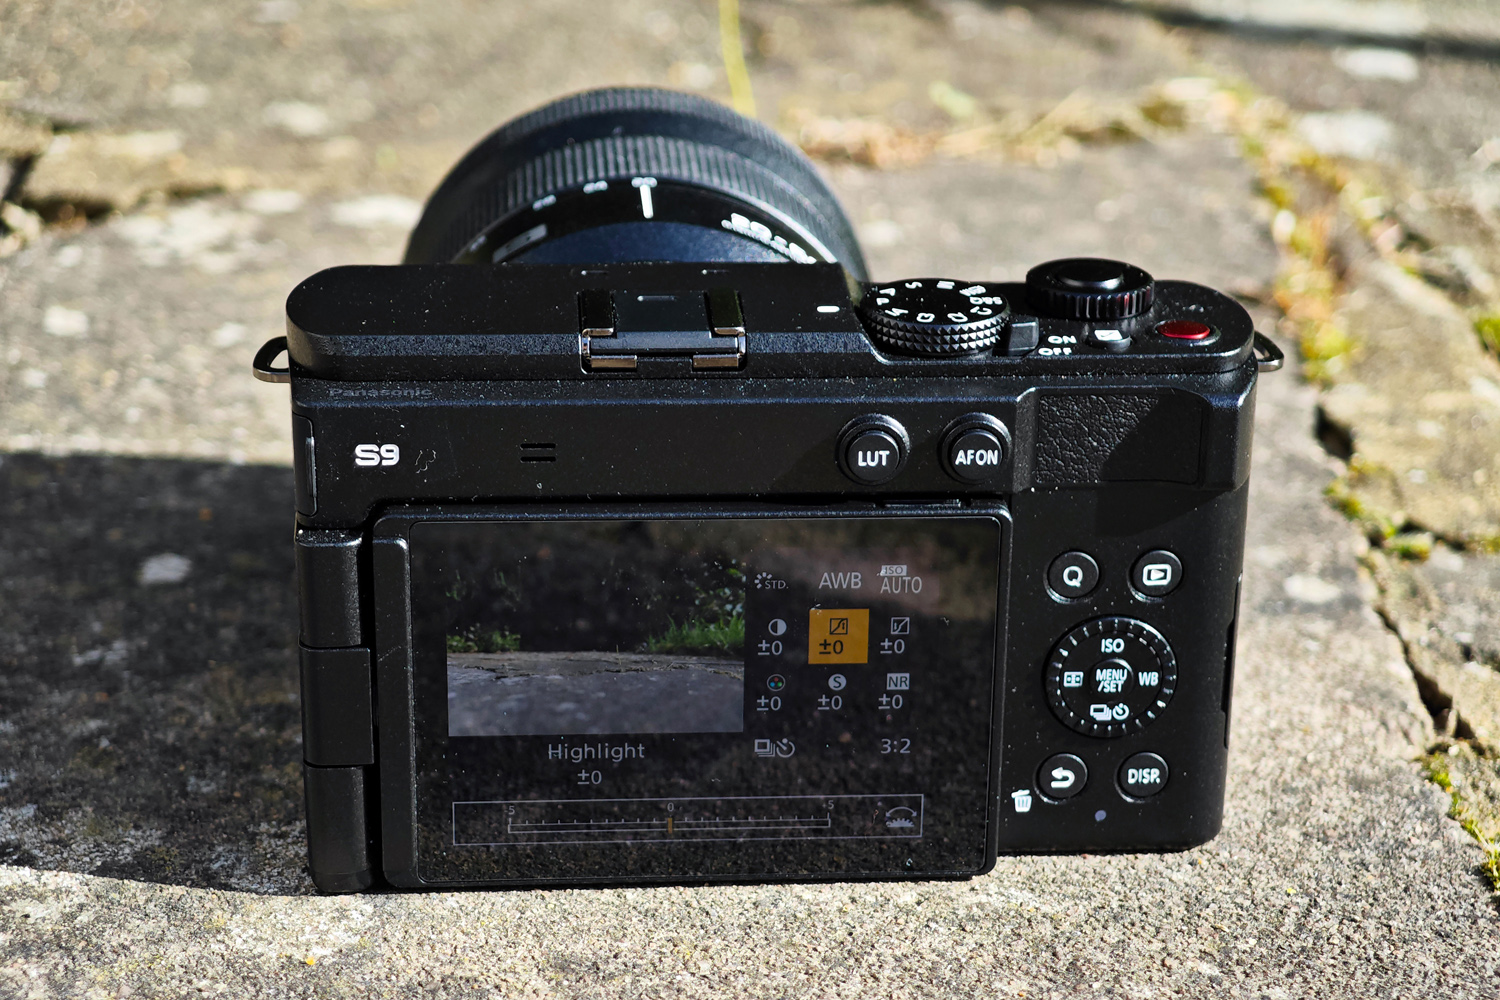 Panasonic Lumix S9 review rear with viewfinder